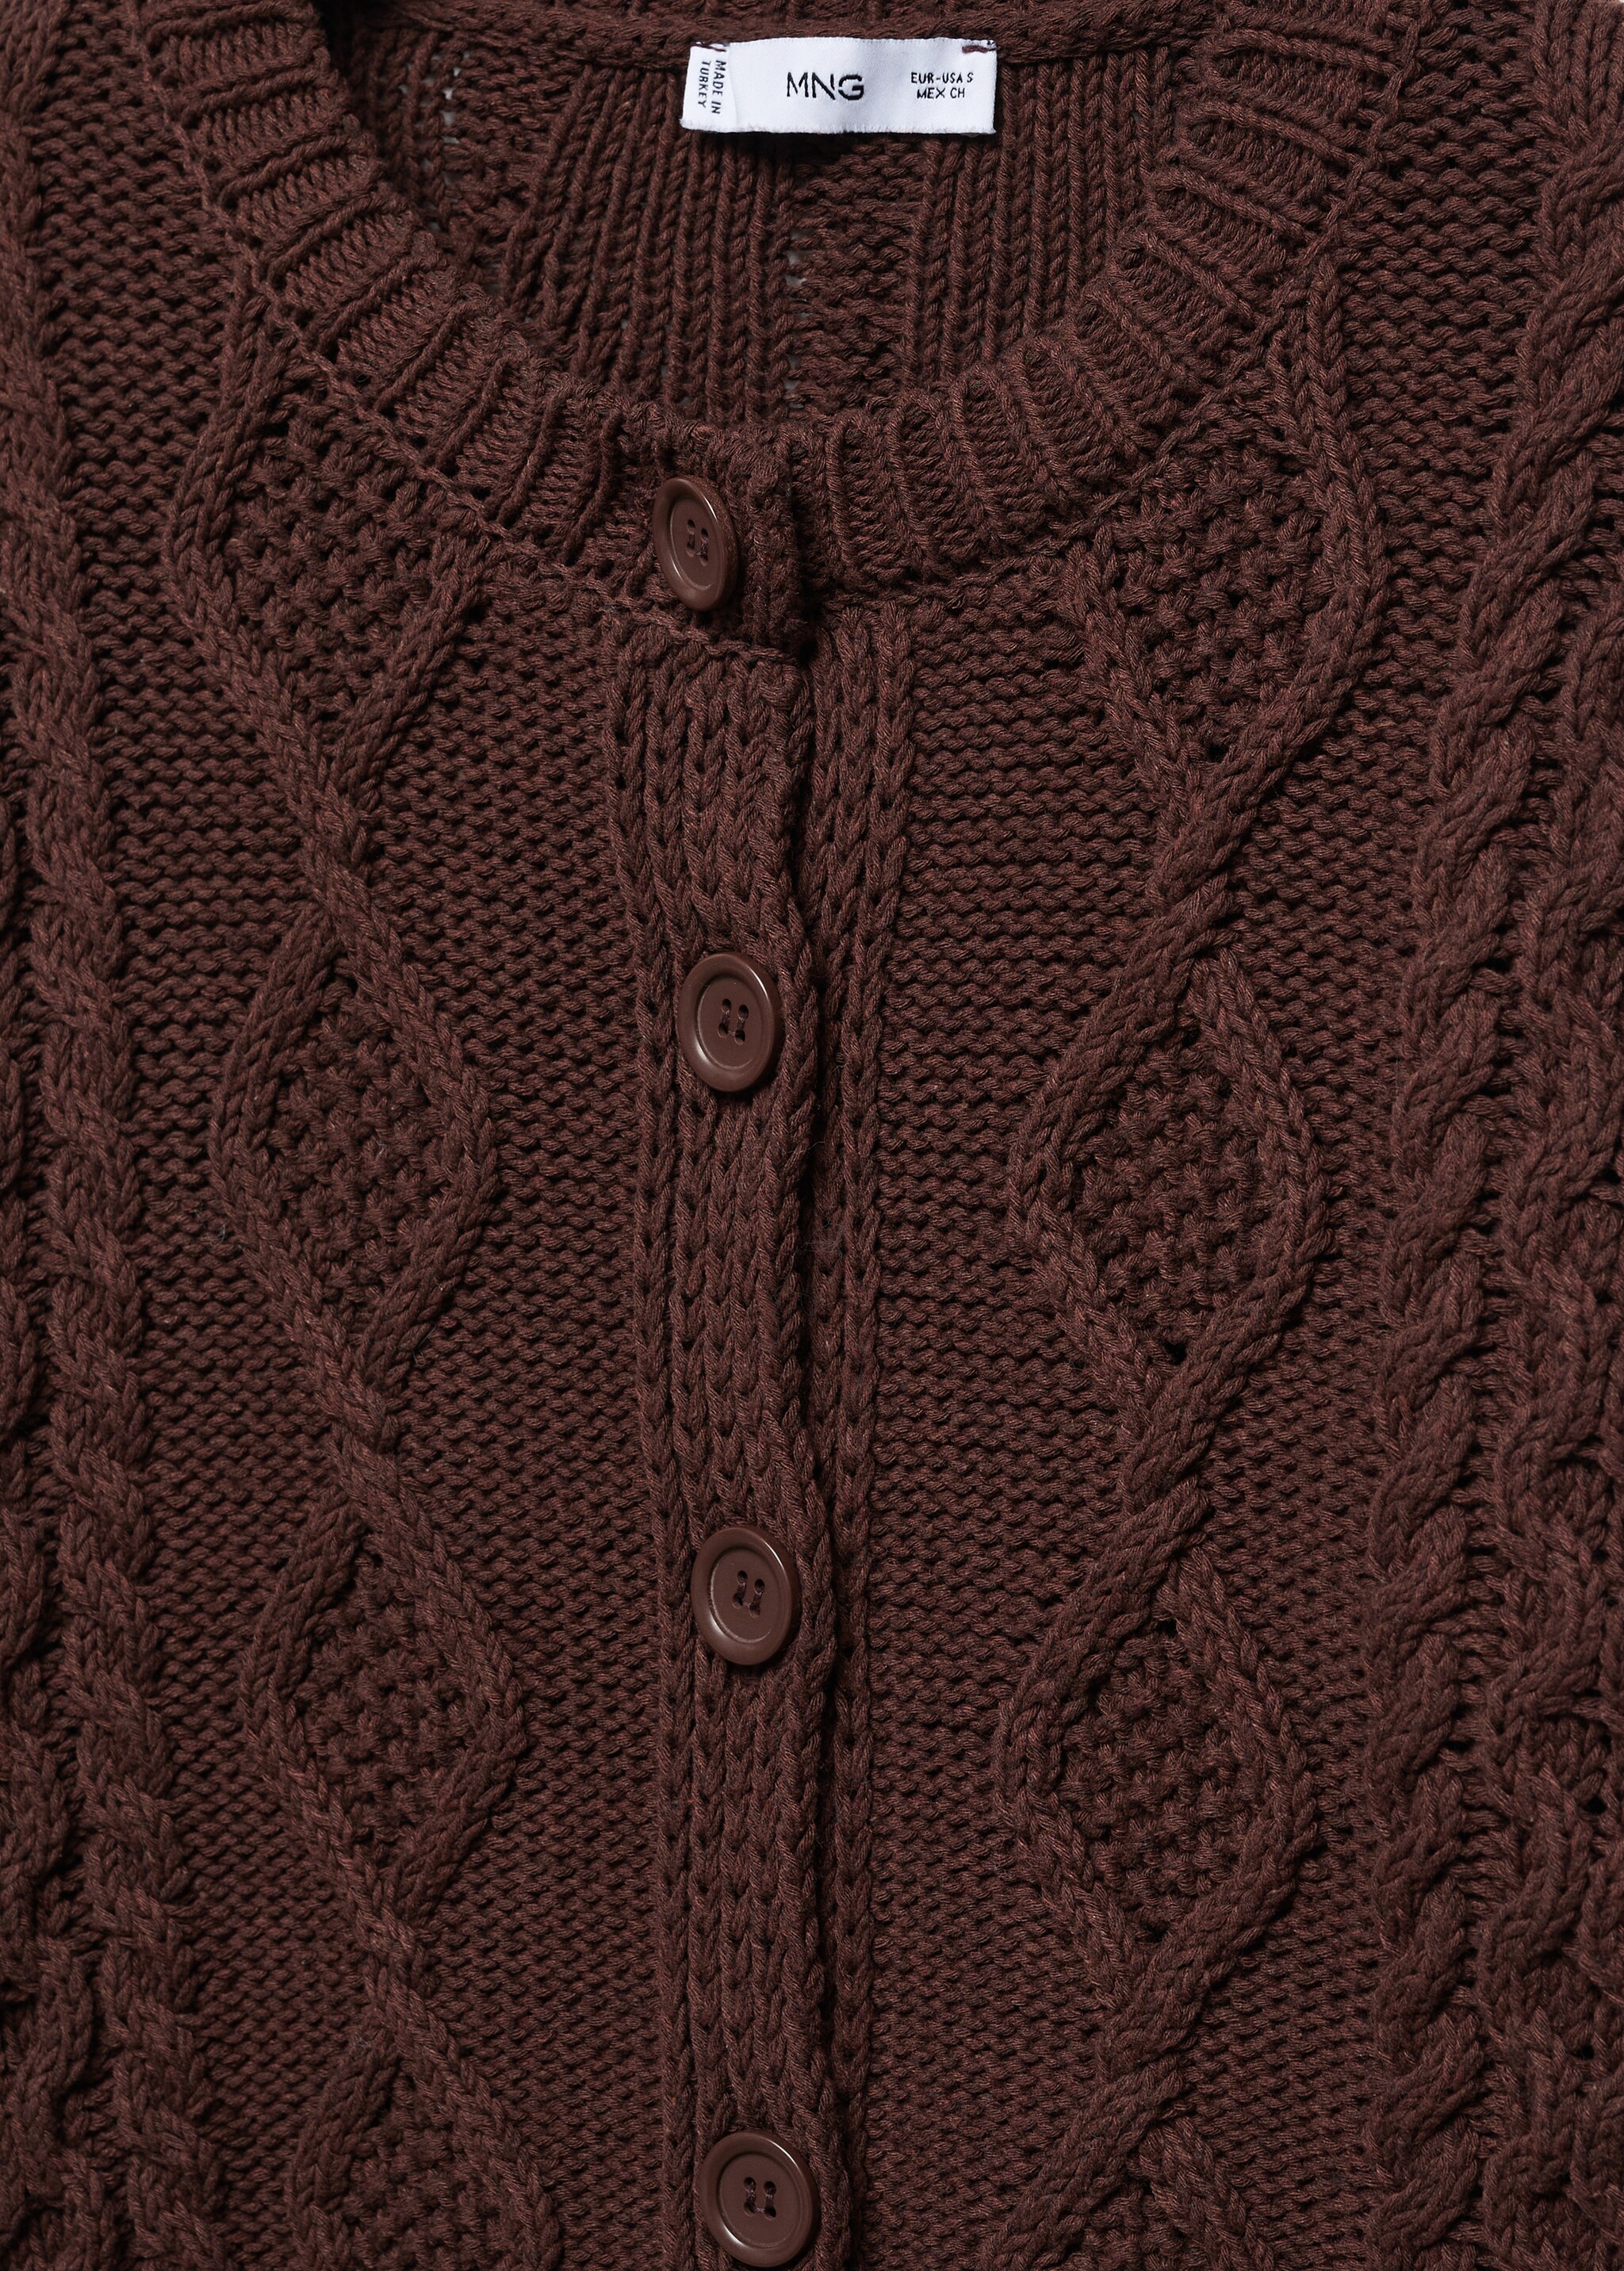 Cable-knit cardigan - Details of the article 8